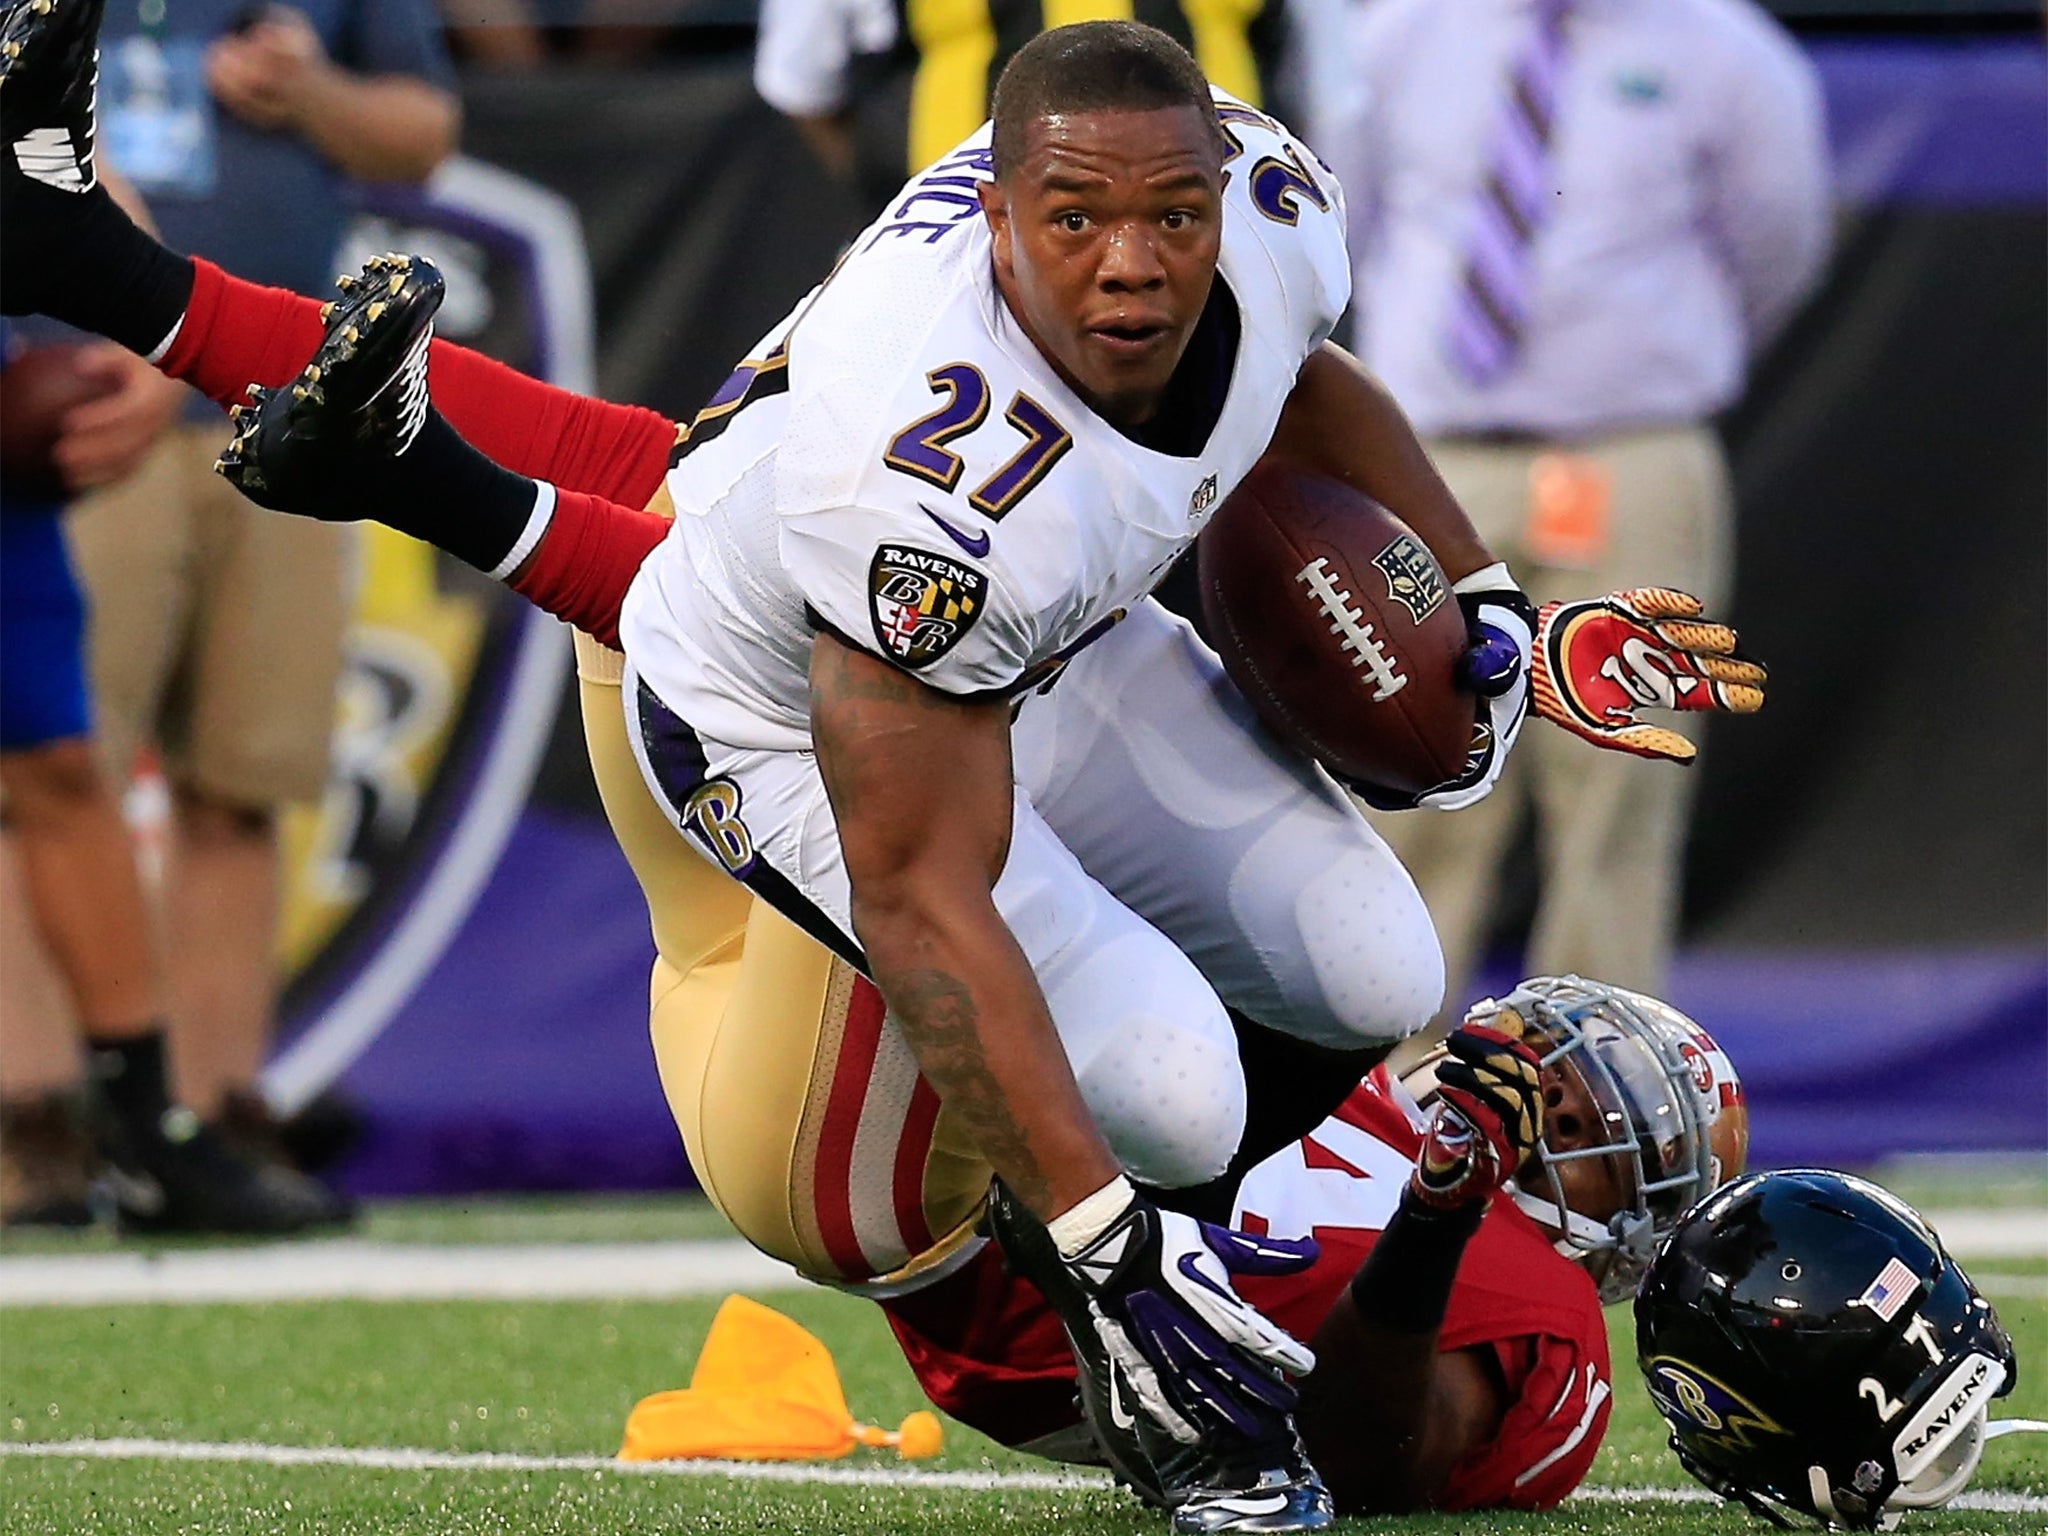 Ray Rice was released by the Baltimore Ravens and suspended by the NFL after a video emerged of him attacking his wife